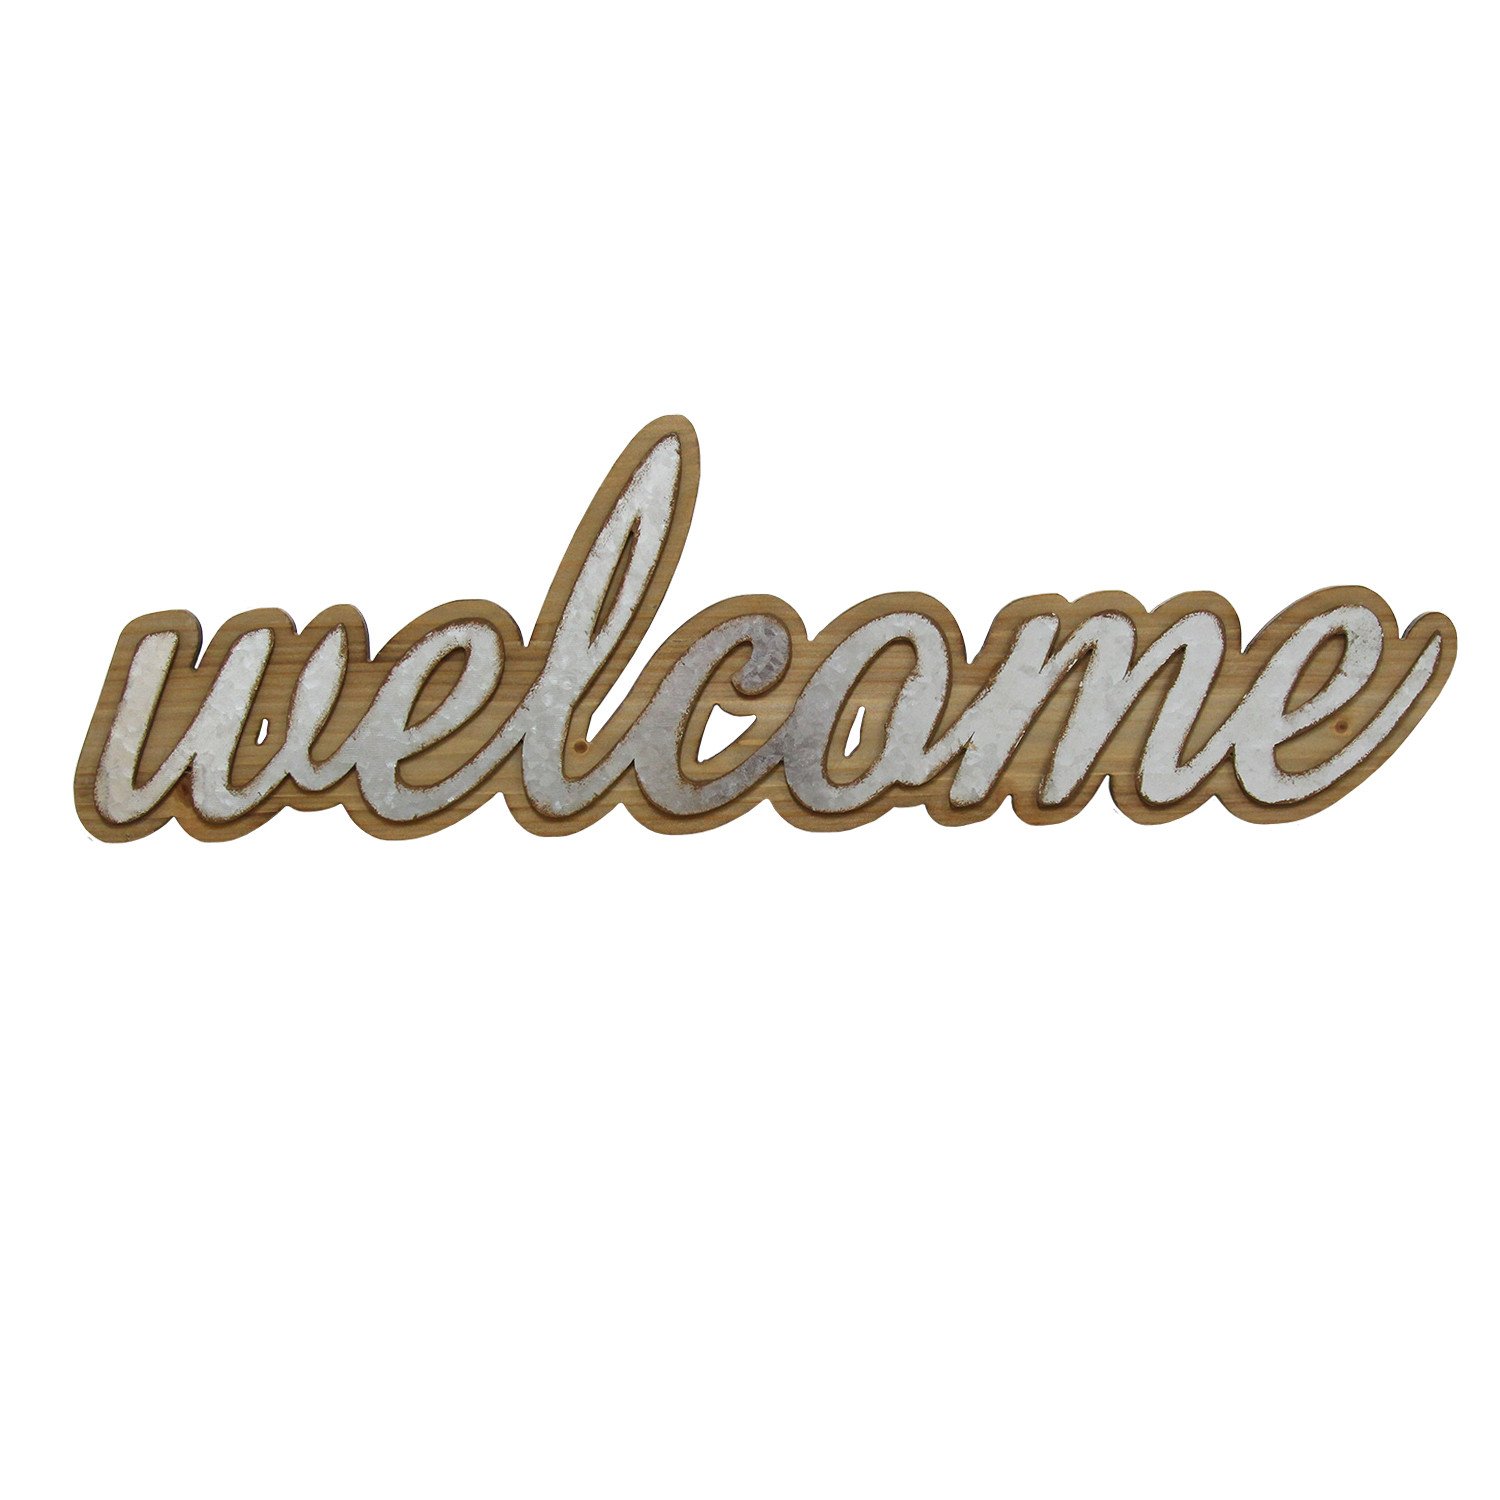 19+ Finest Welcome wall art images info